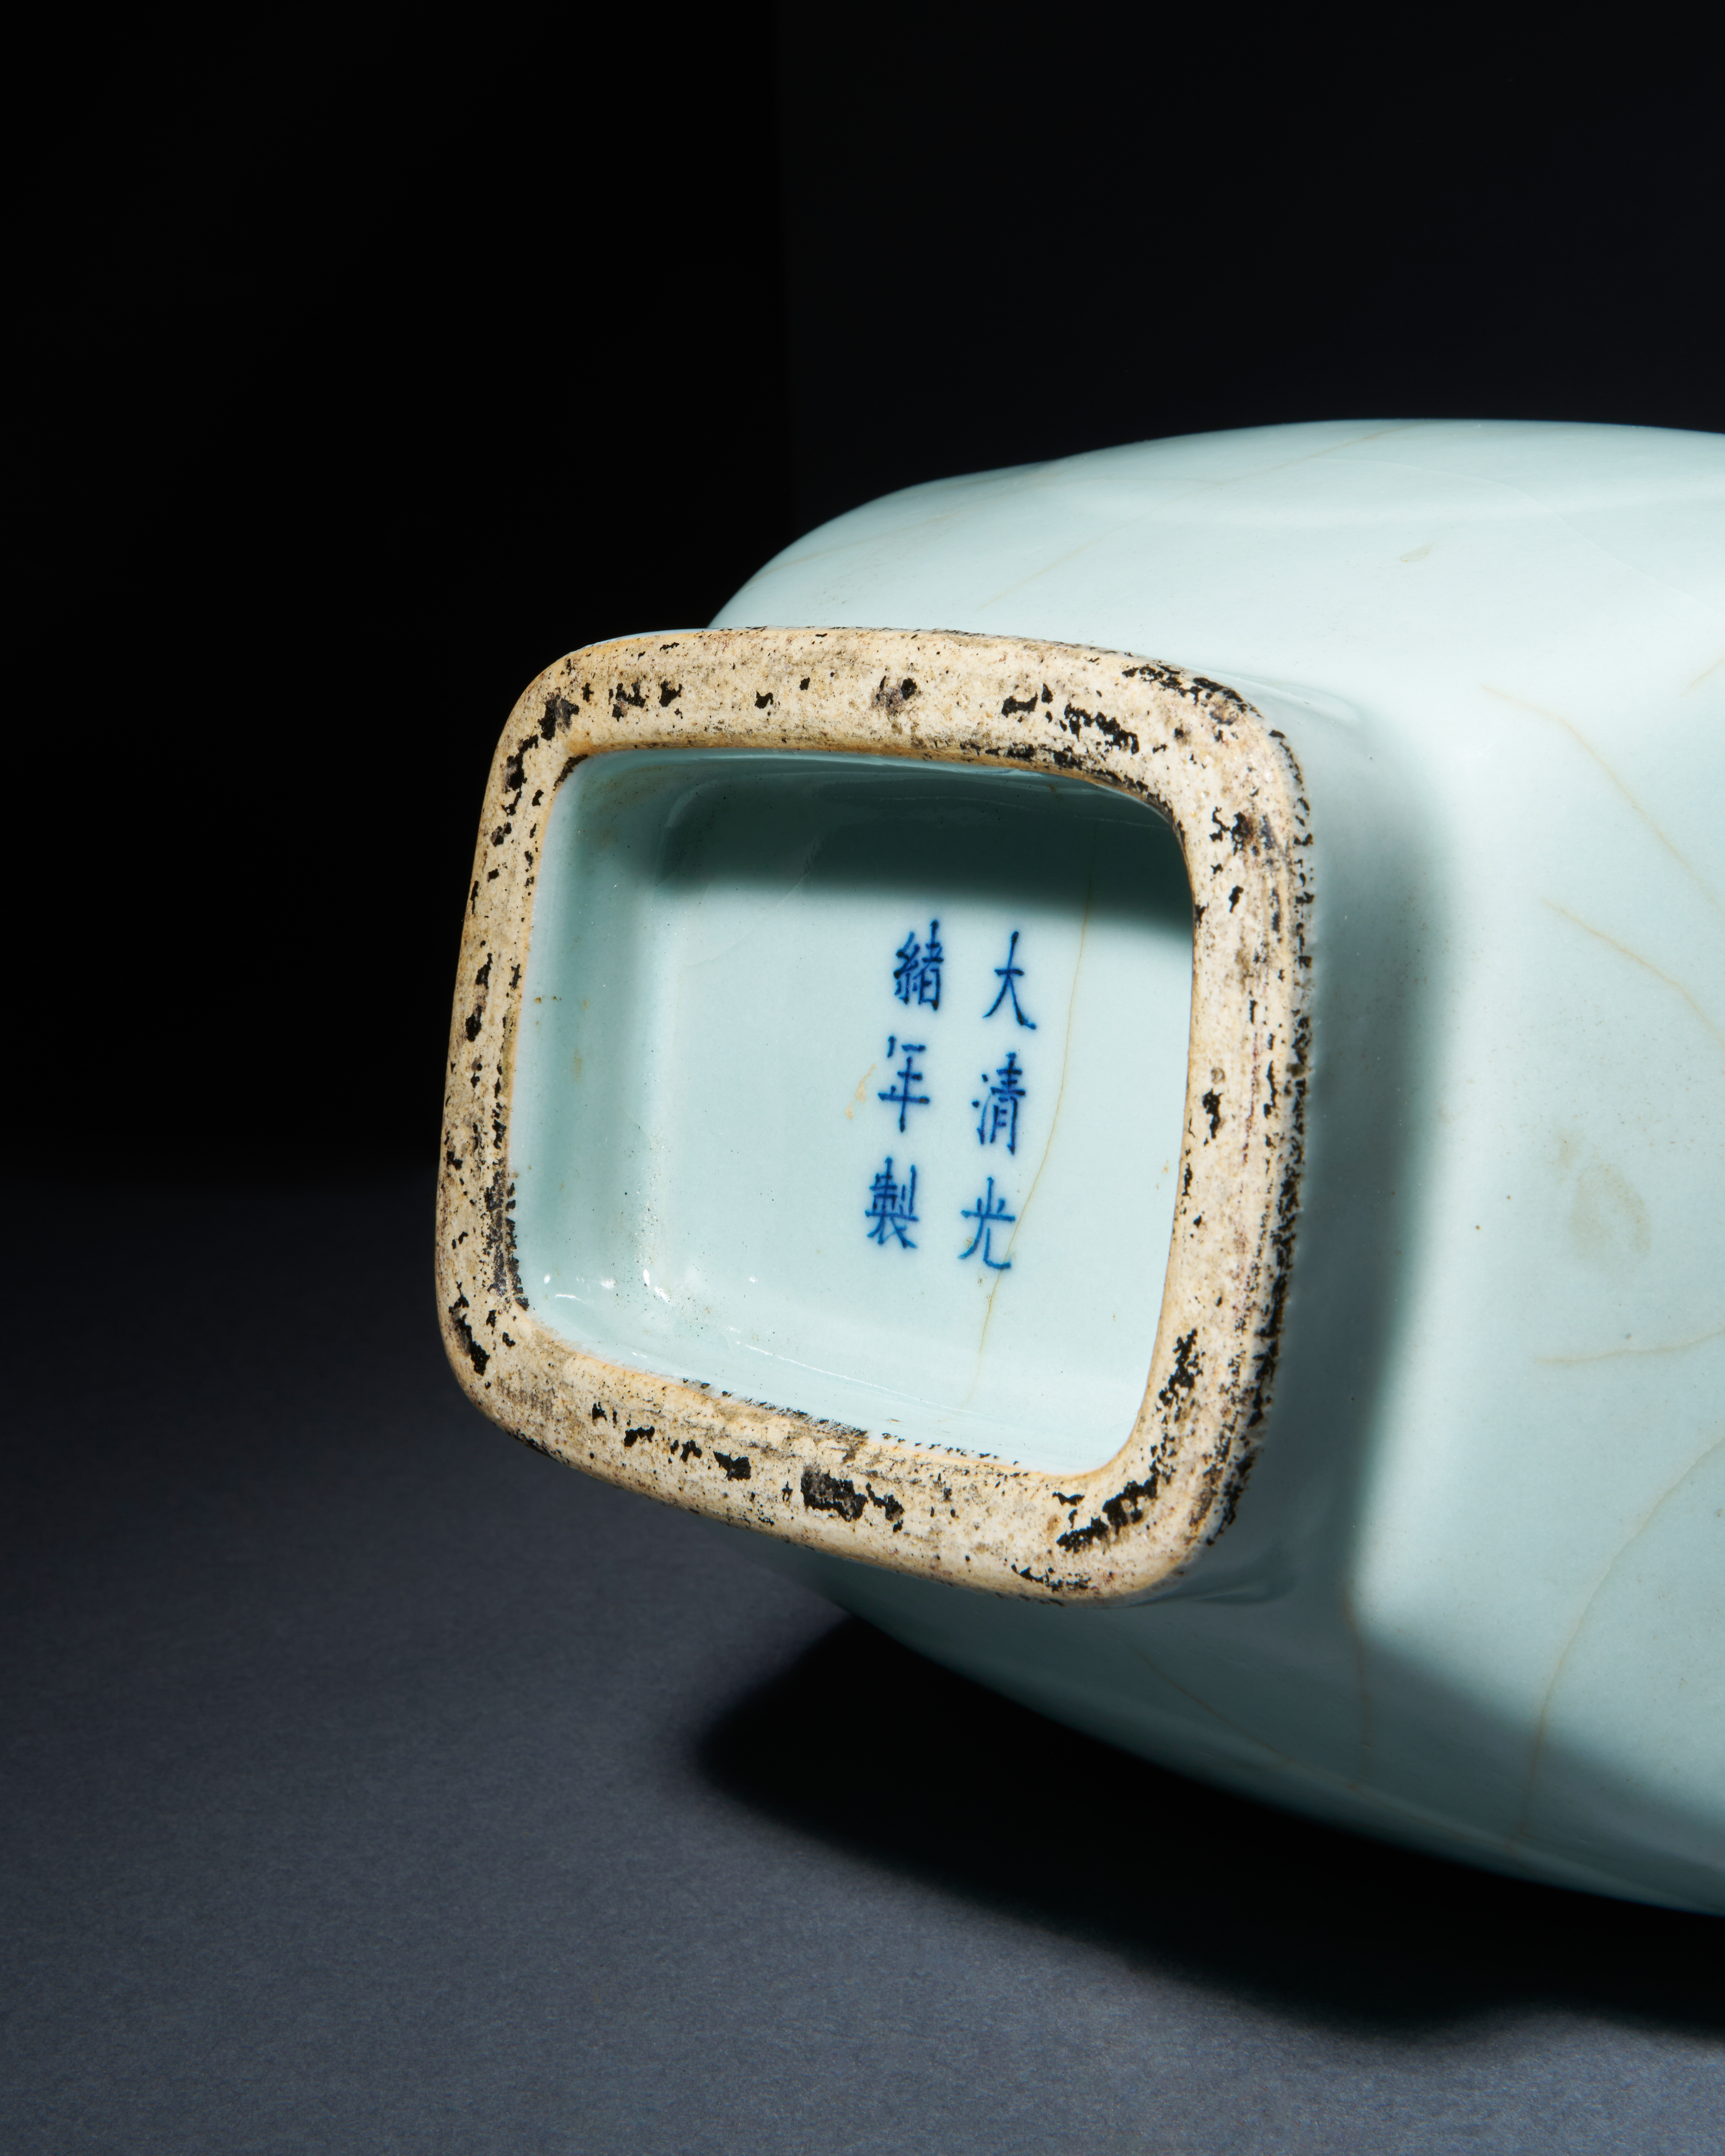 A GUAN-TYPE HU-FORM VASE GUANGXU SIX-CHARACTER MARK IN UNDERGLAZE BLUE AND OF THE PERIOD (1875-1908) - Image 4 of 4